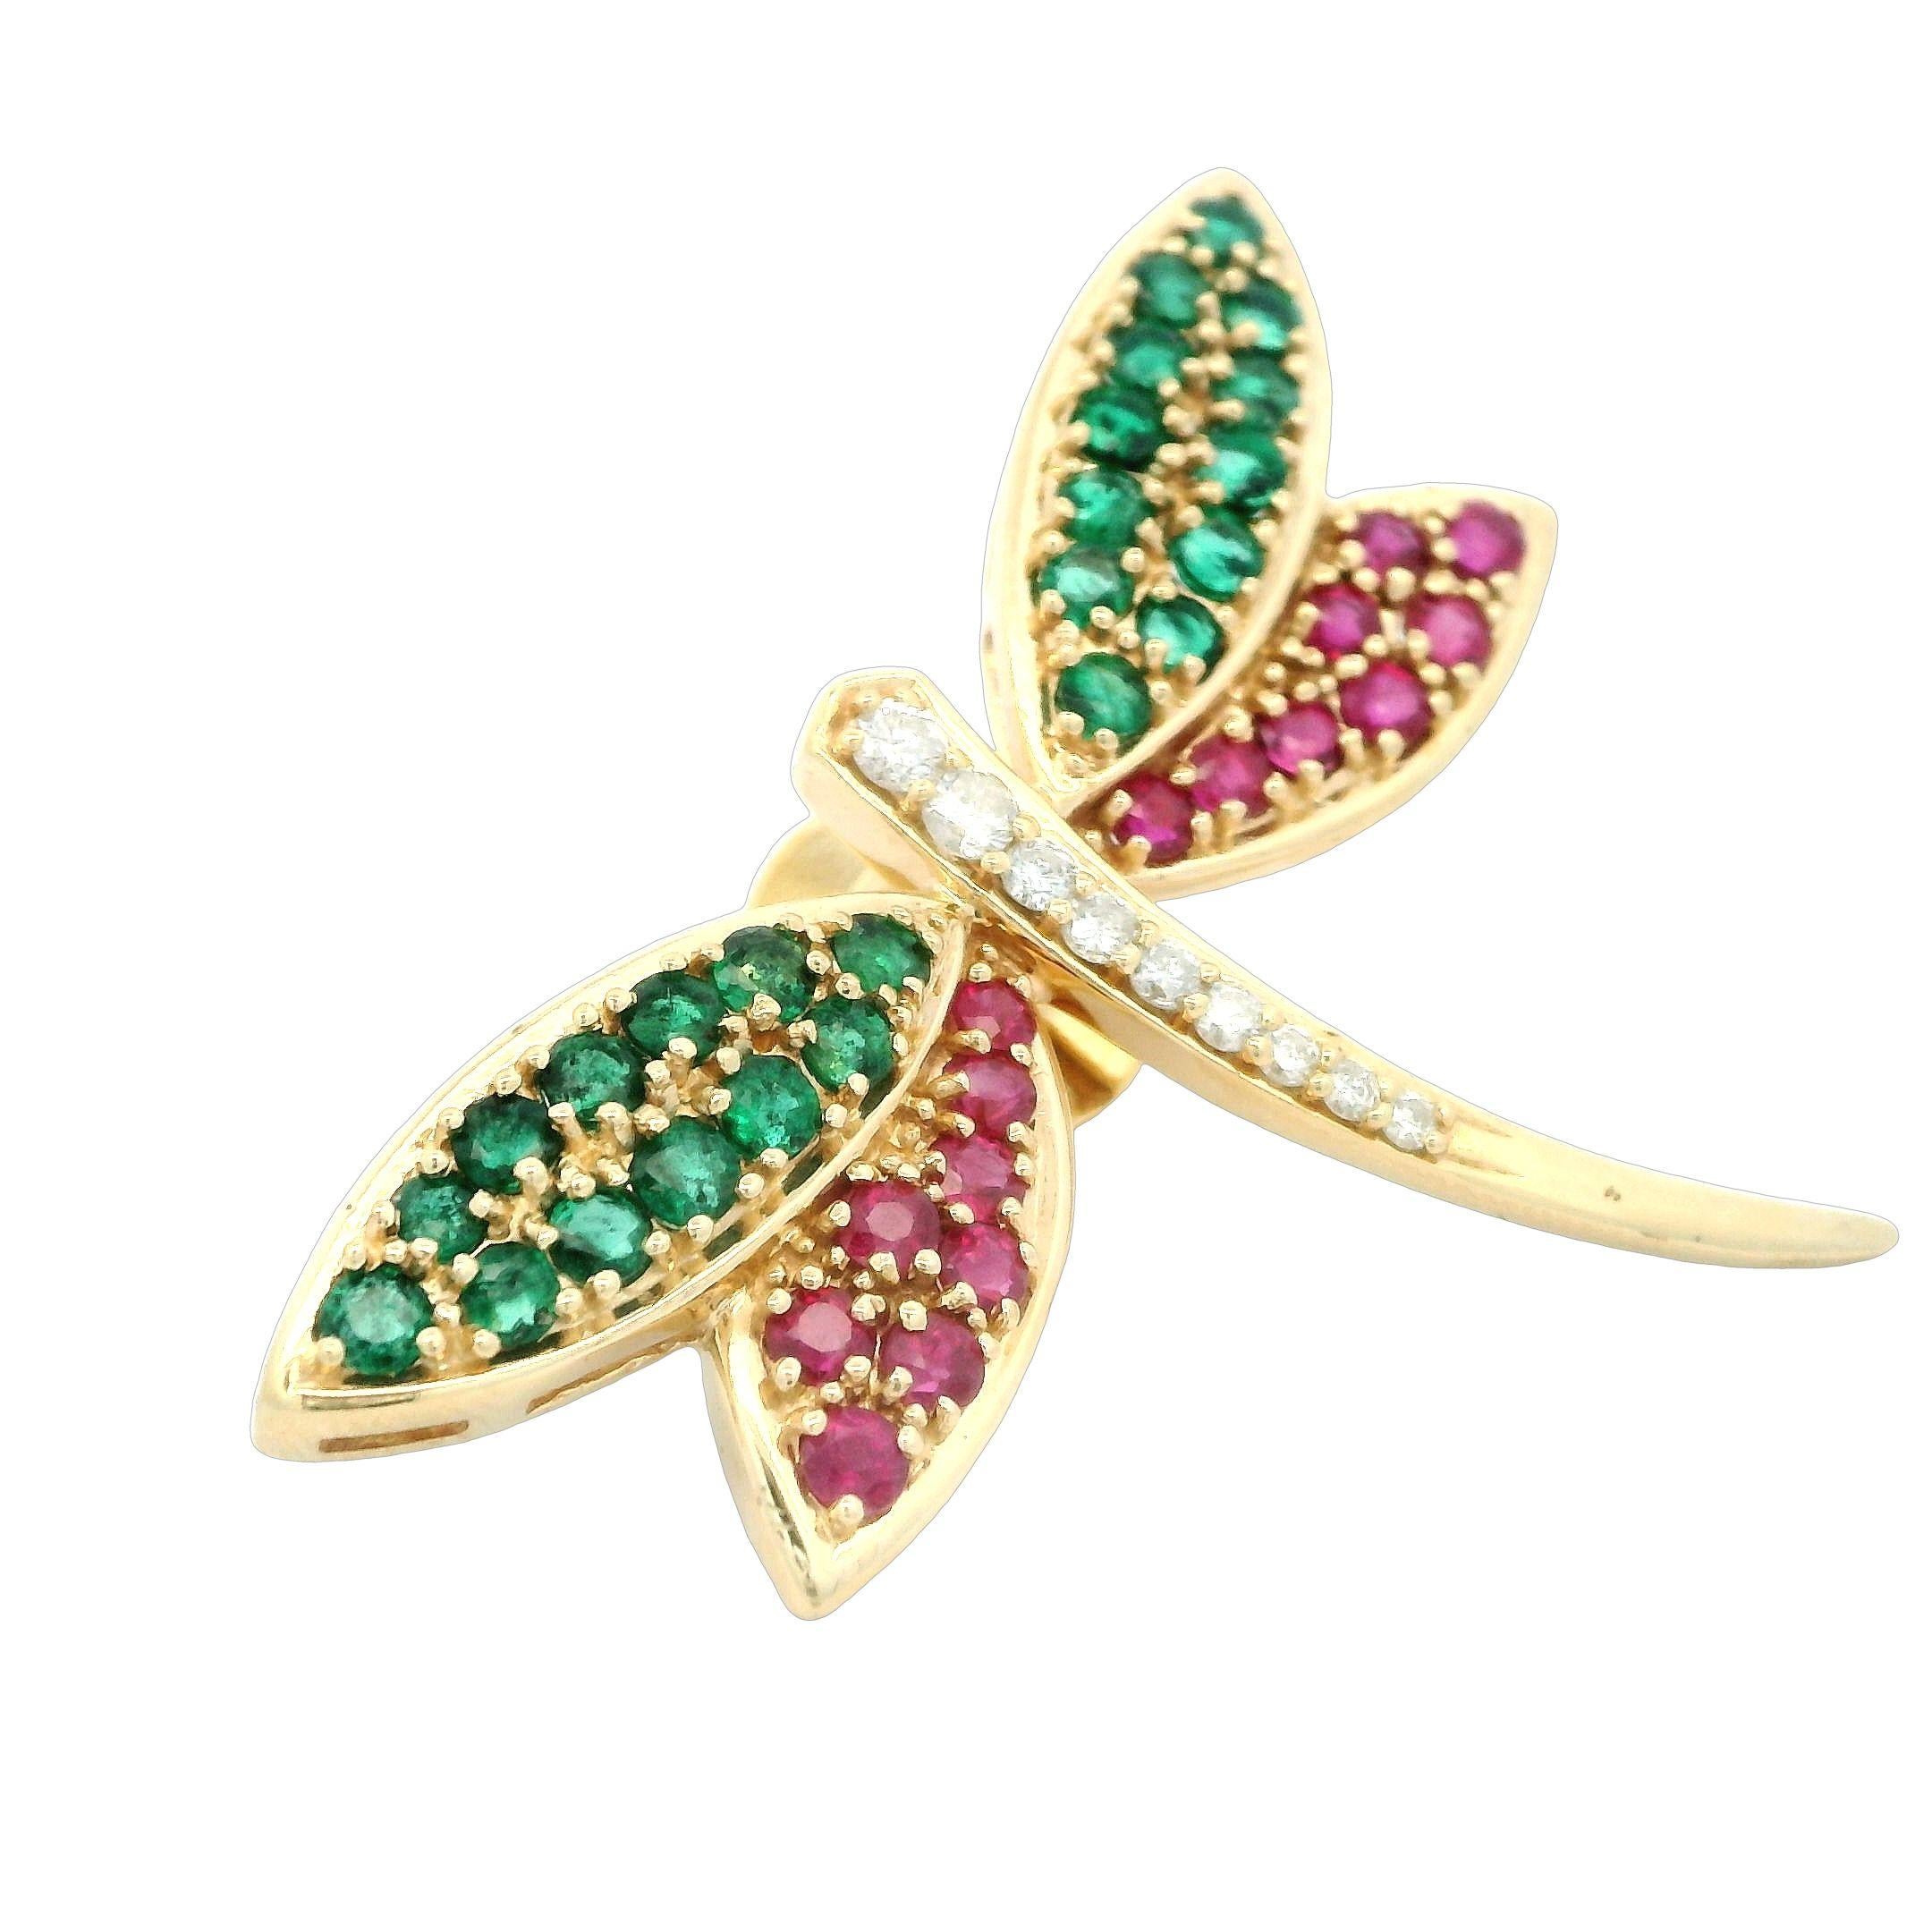 Elevate your style with this fashionable butterfly stick pin accessory that effortlessly combines nature's beauty and precious gemstones, offered by Alex & Co. Gleaming 14 karat yellow gold, this vibrant  piece exudes opulence at every angle. This